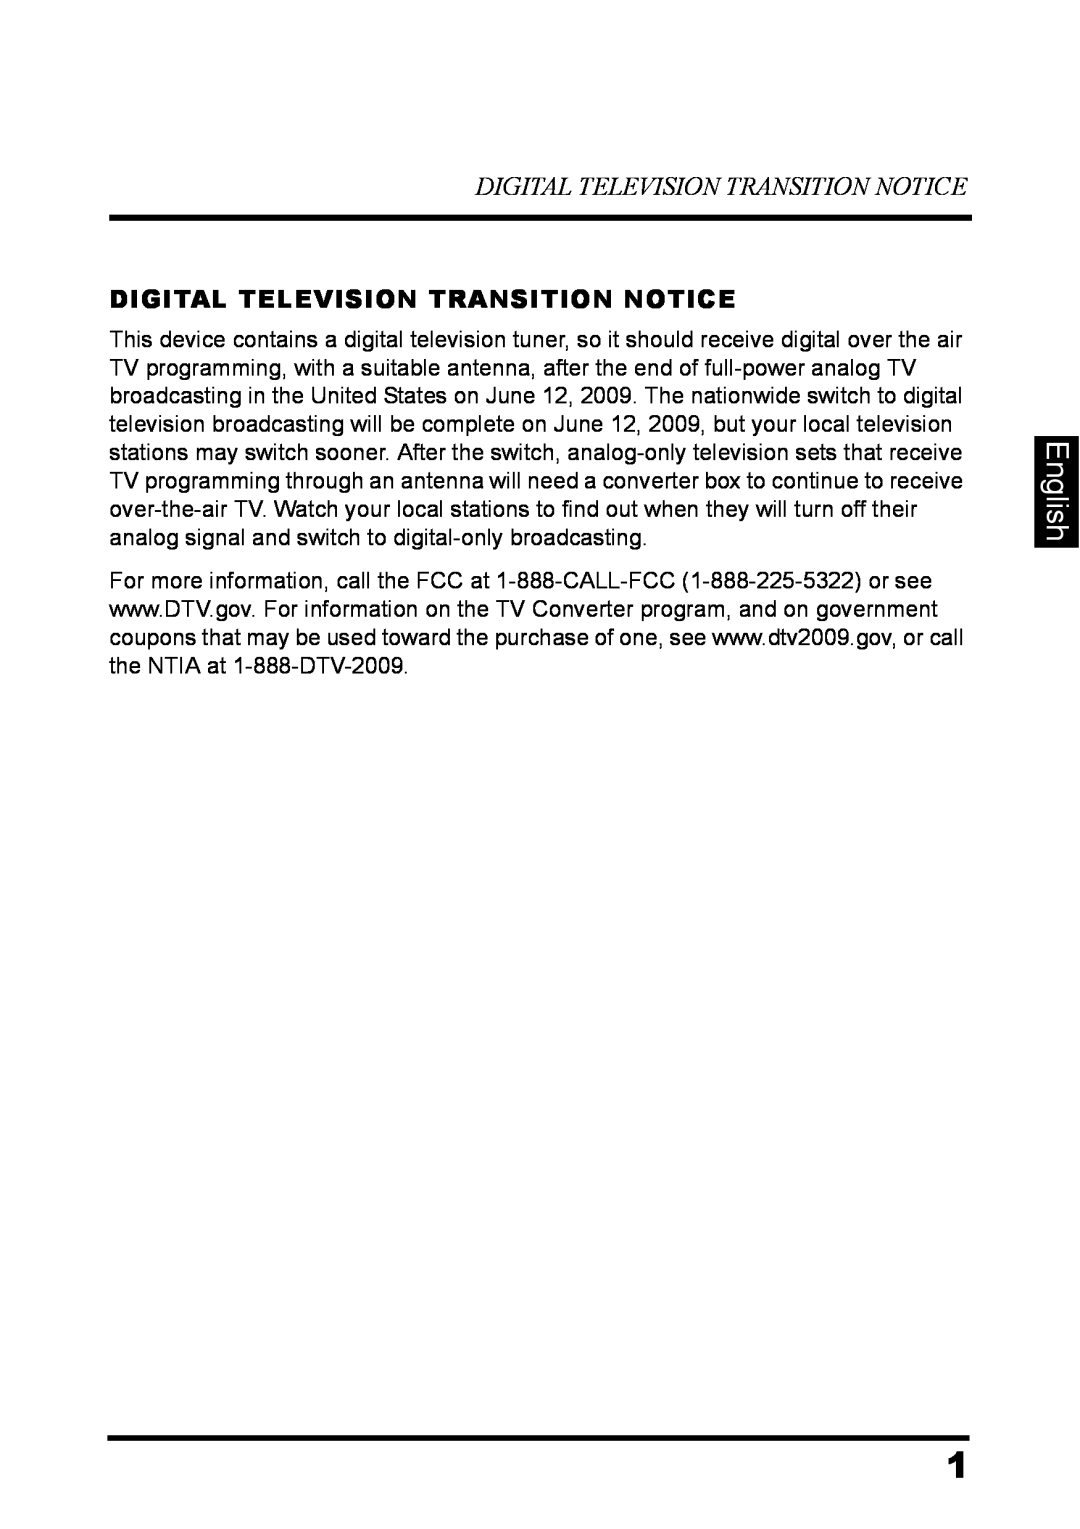 Westinghouse LD-3237 user manual English, Digital Television Transition Notice 